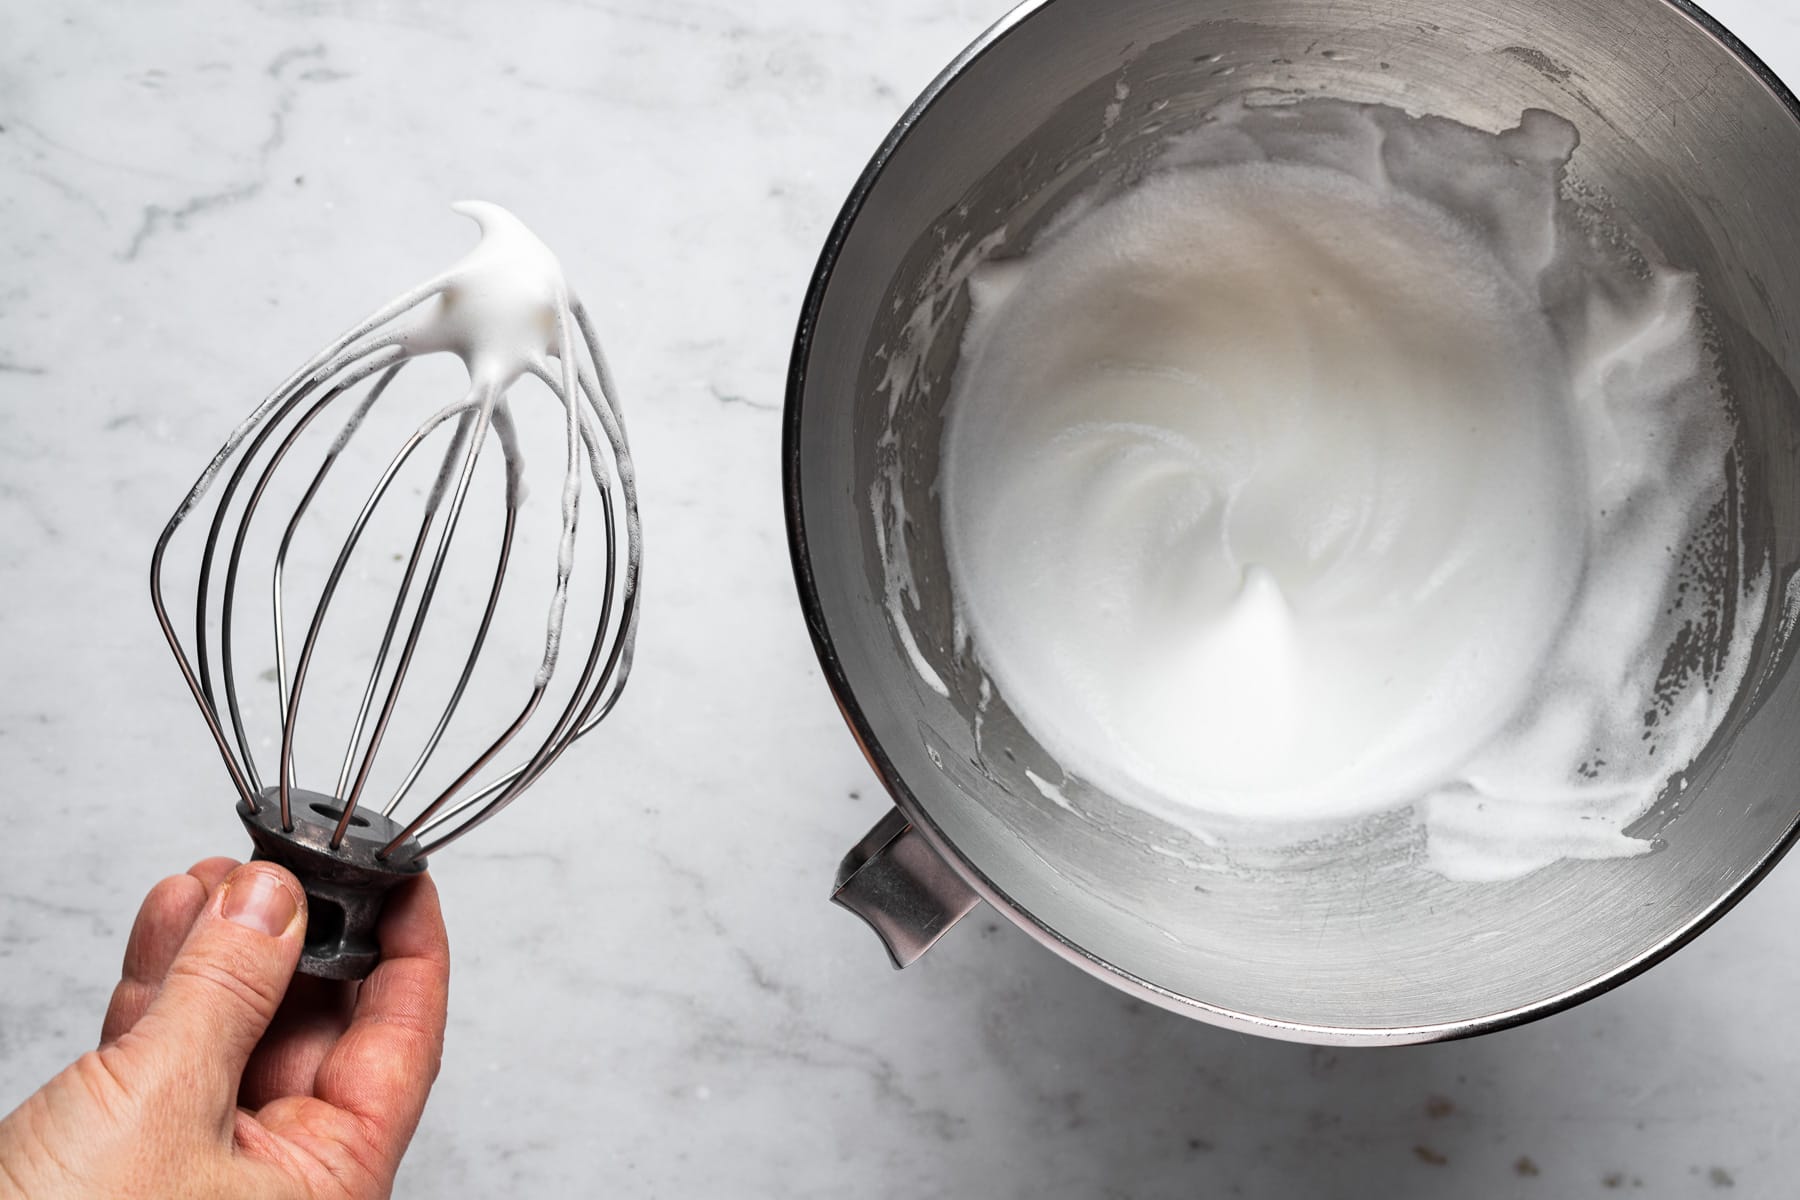 A process photo showing the wire whisk from a stand mixer holding egg whites beaten to soft peaks. The metal bowl of the mixer sits on a marble surface on the right of the photo.